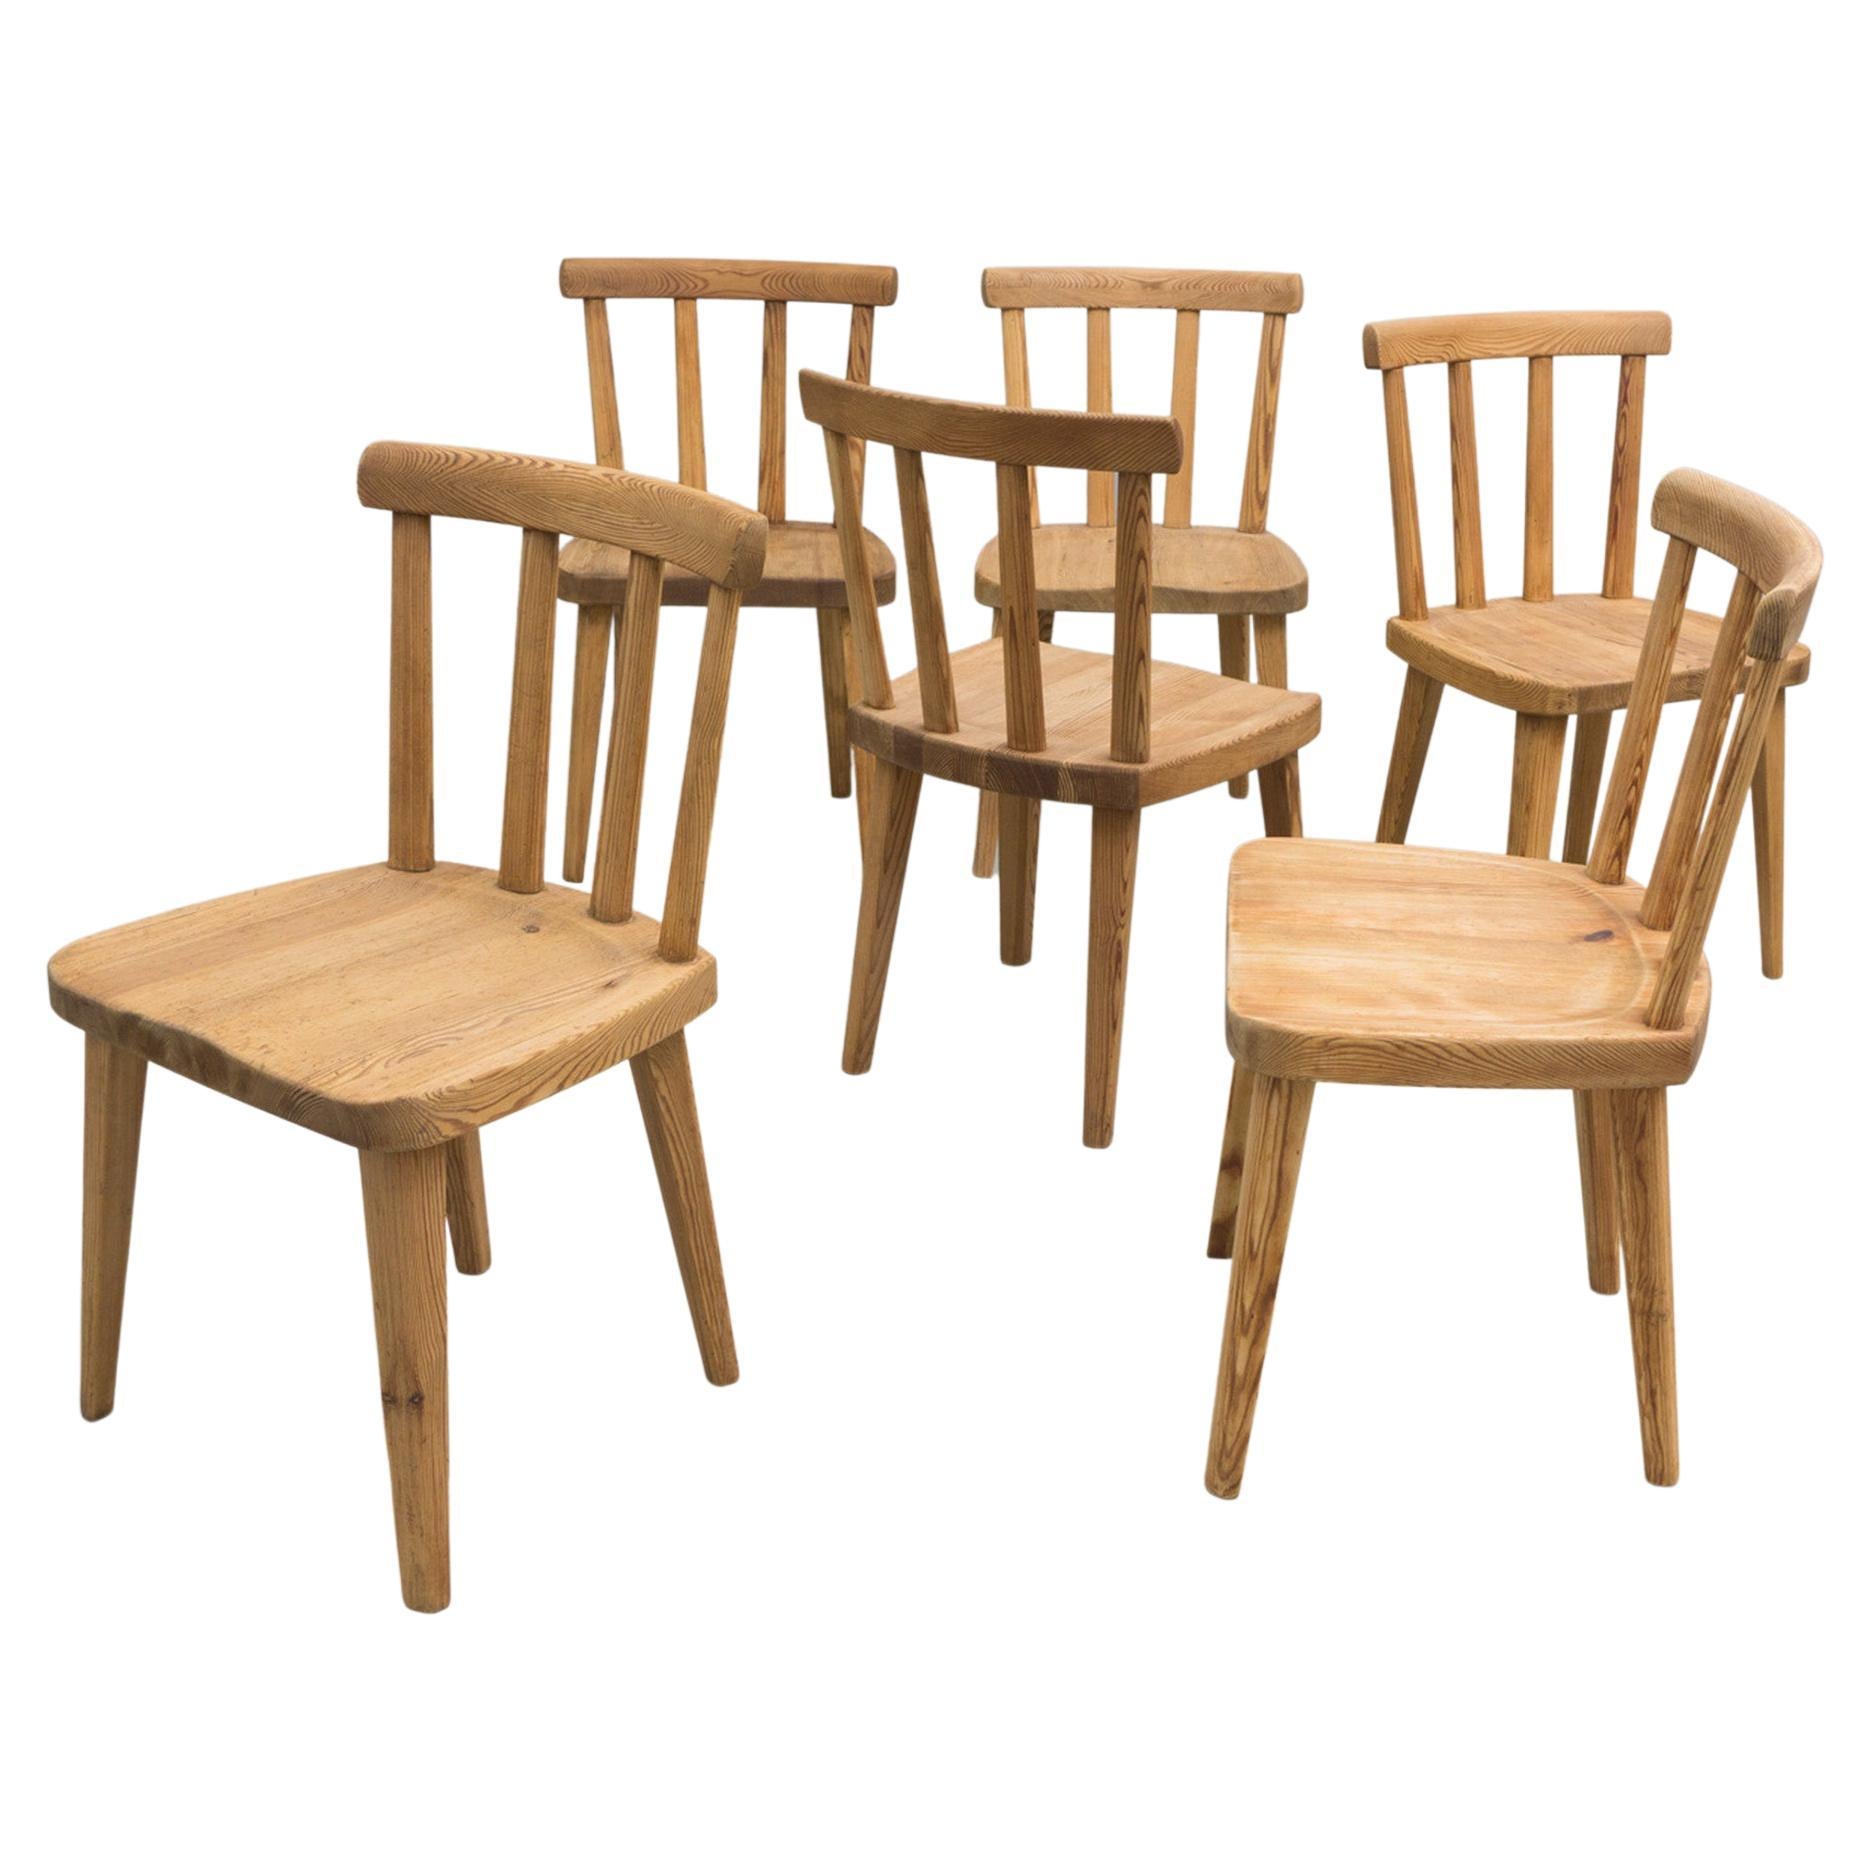 Set of Swedish Pine Wood Chairs, 'Uto' by Axel Einar Hjorth, 1930 For Sale